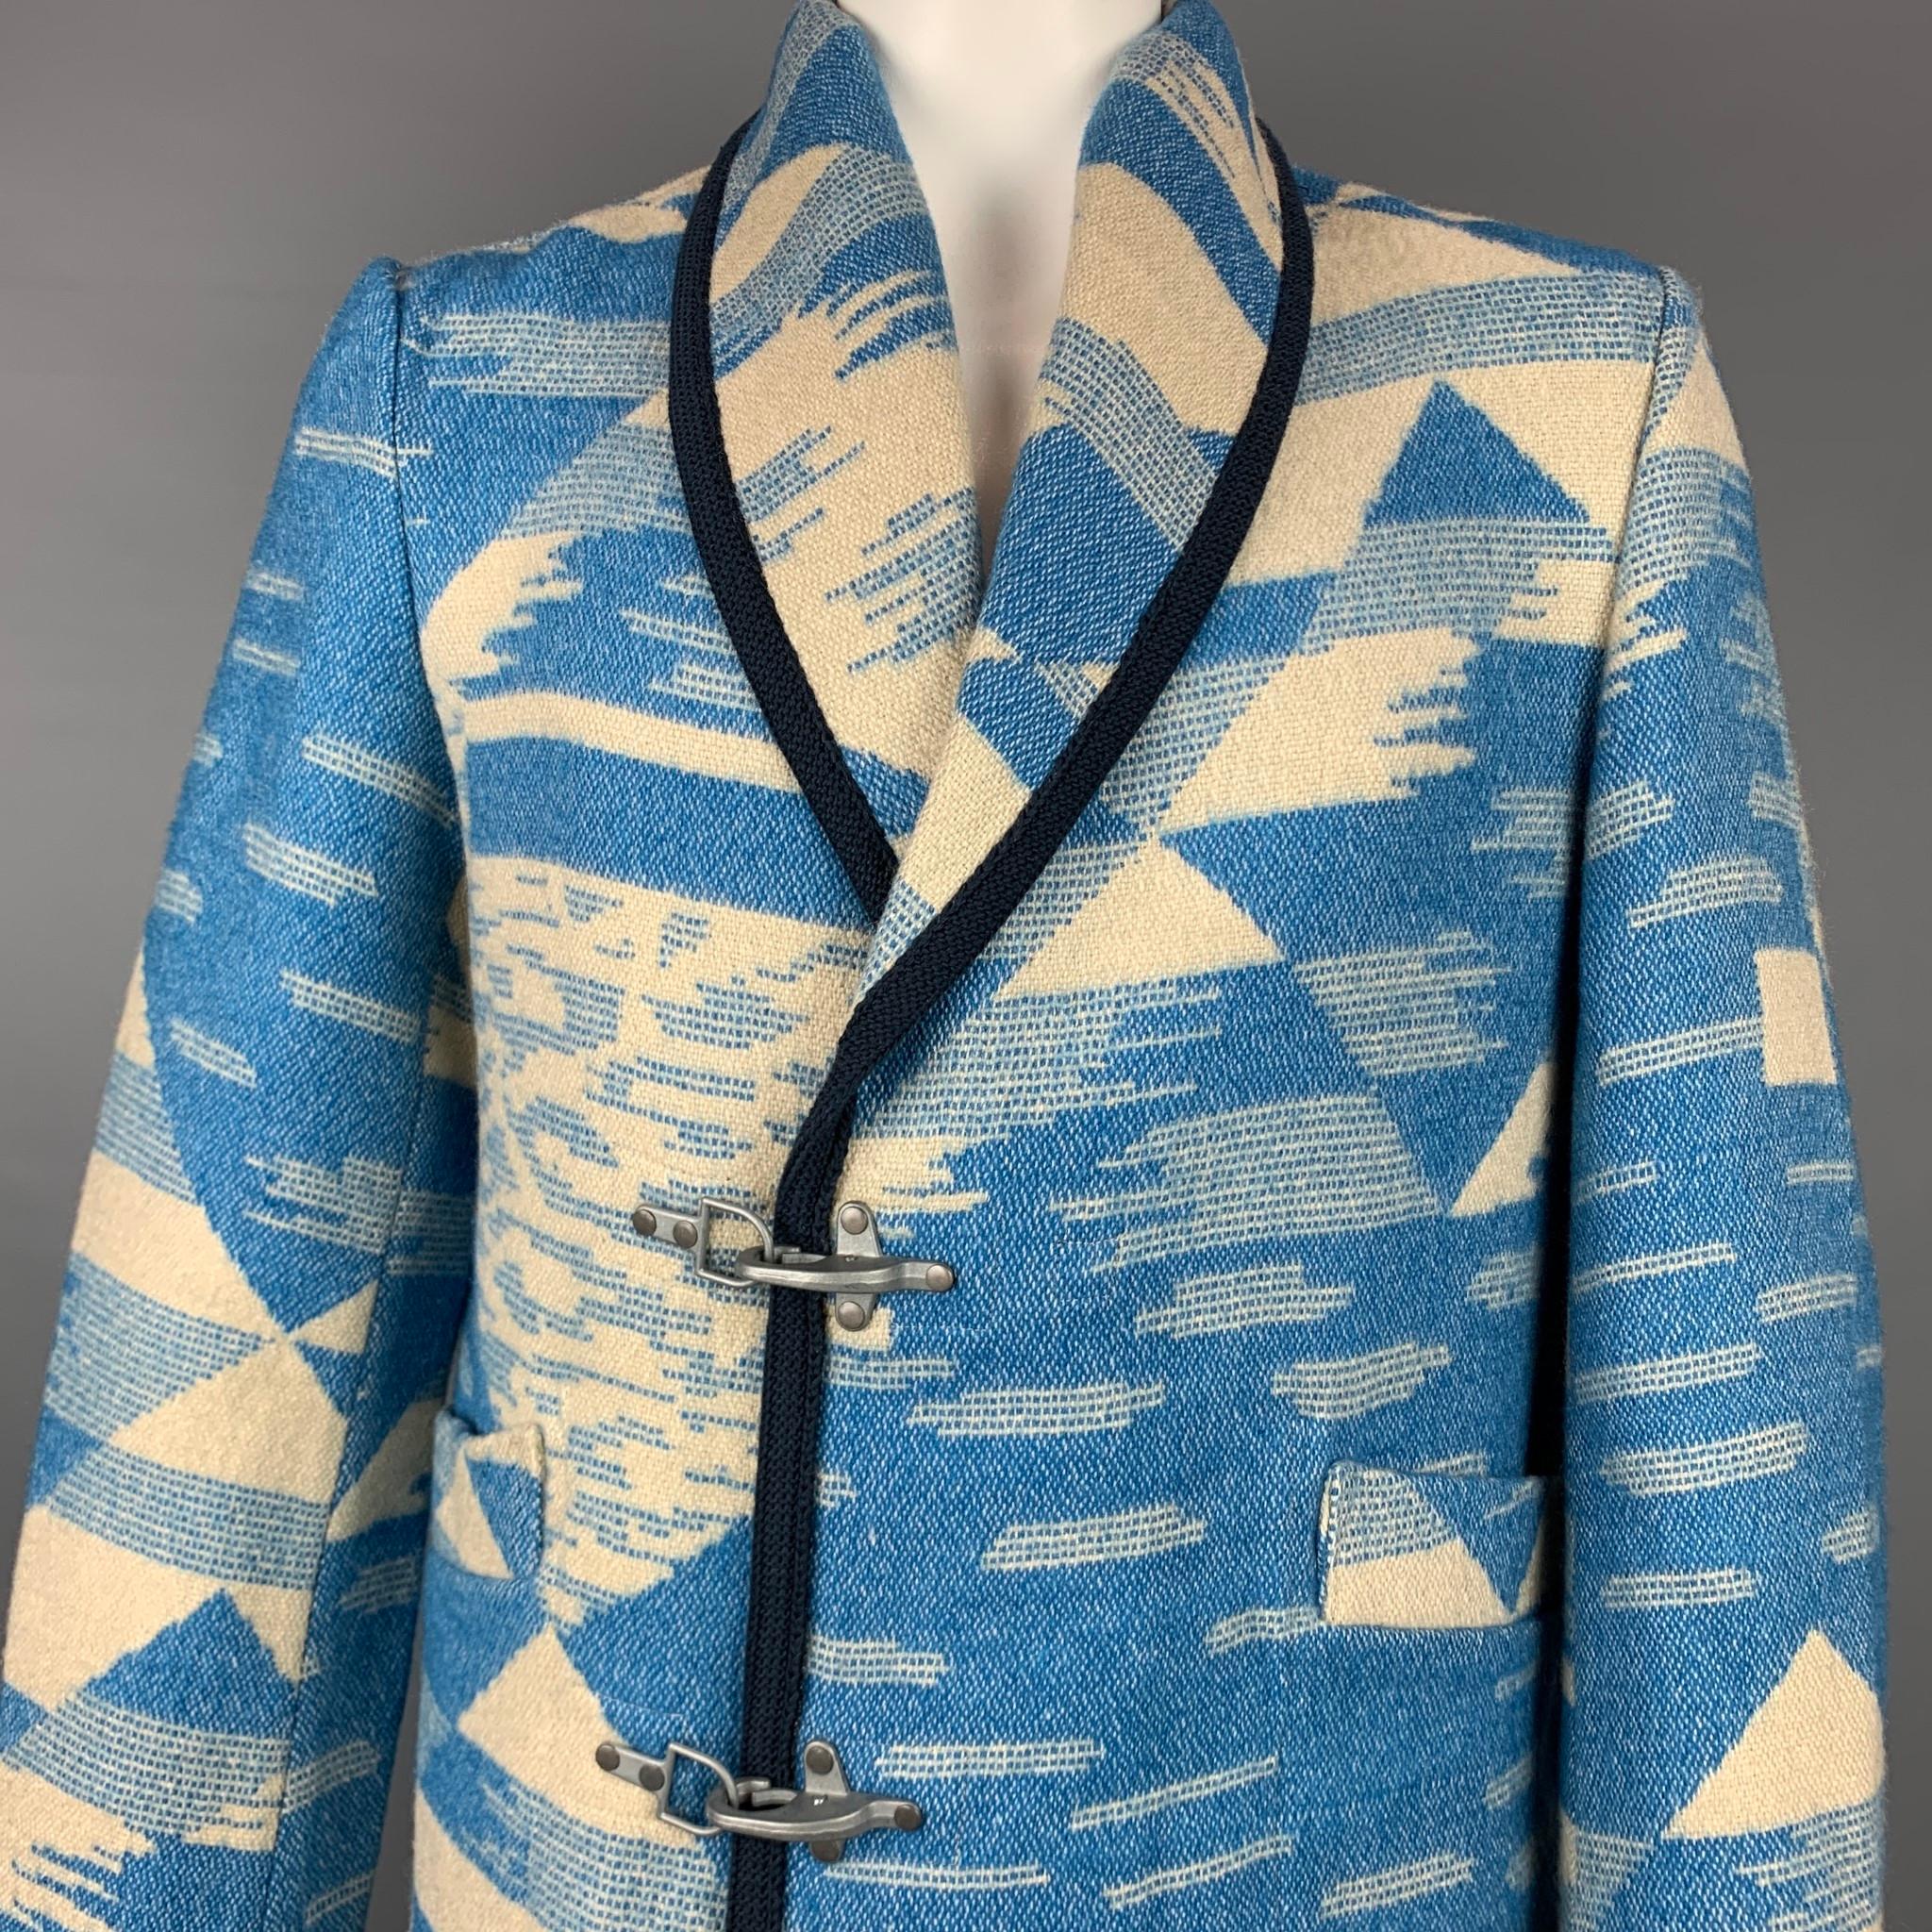 SCOTCH & SODA coat comes in a blue & cream navajo acrylic blend featuring a shawl collar, patch pockets, unlined, and a metal hook closure. 

Very Good Pre-Owned Condition.
Marked: XL

Measurements:

Shoulder: 18 in.
Chest: 46 in.
Sleeve: 28.5